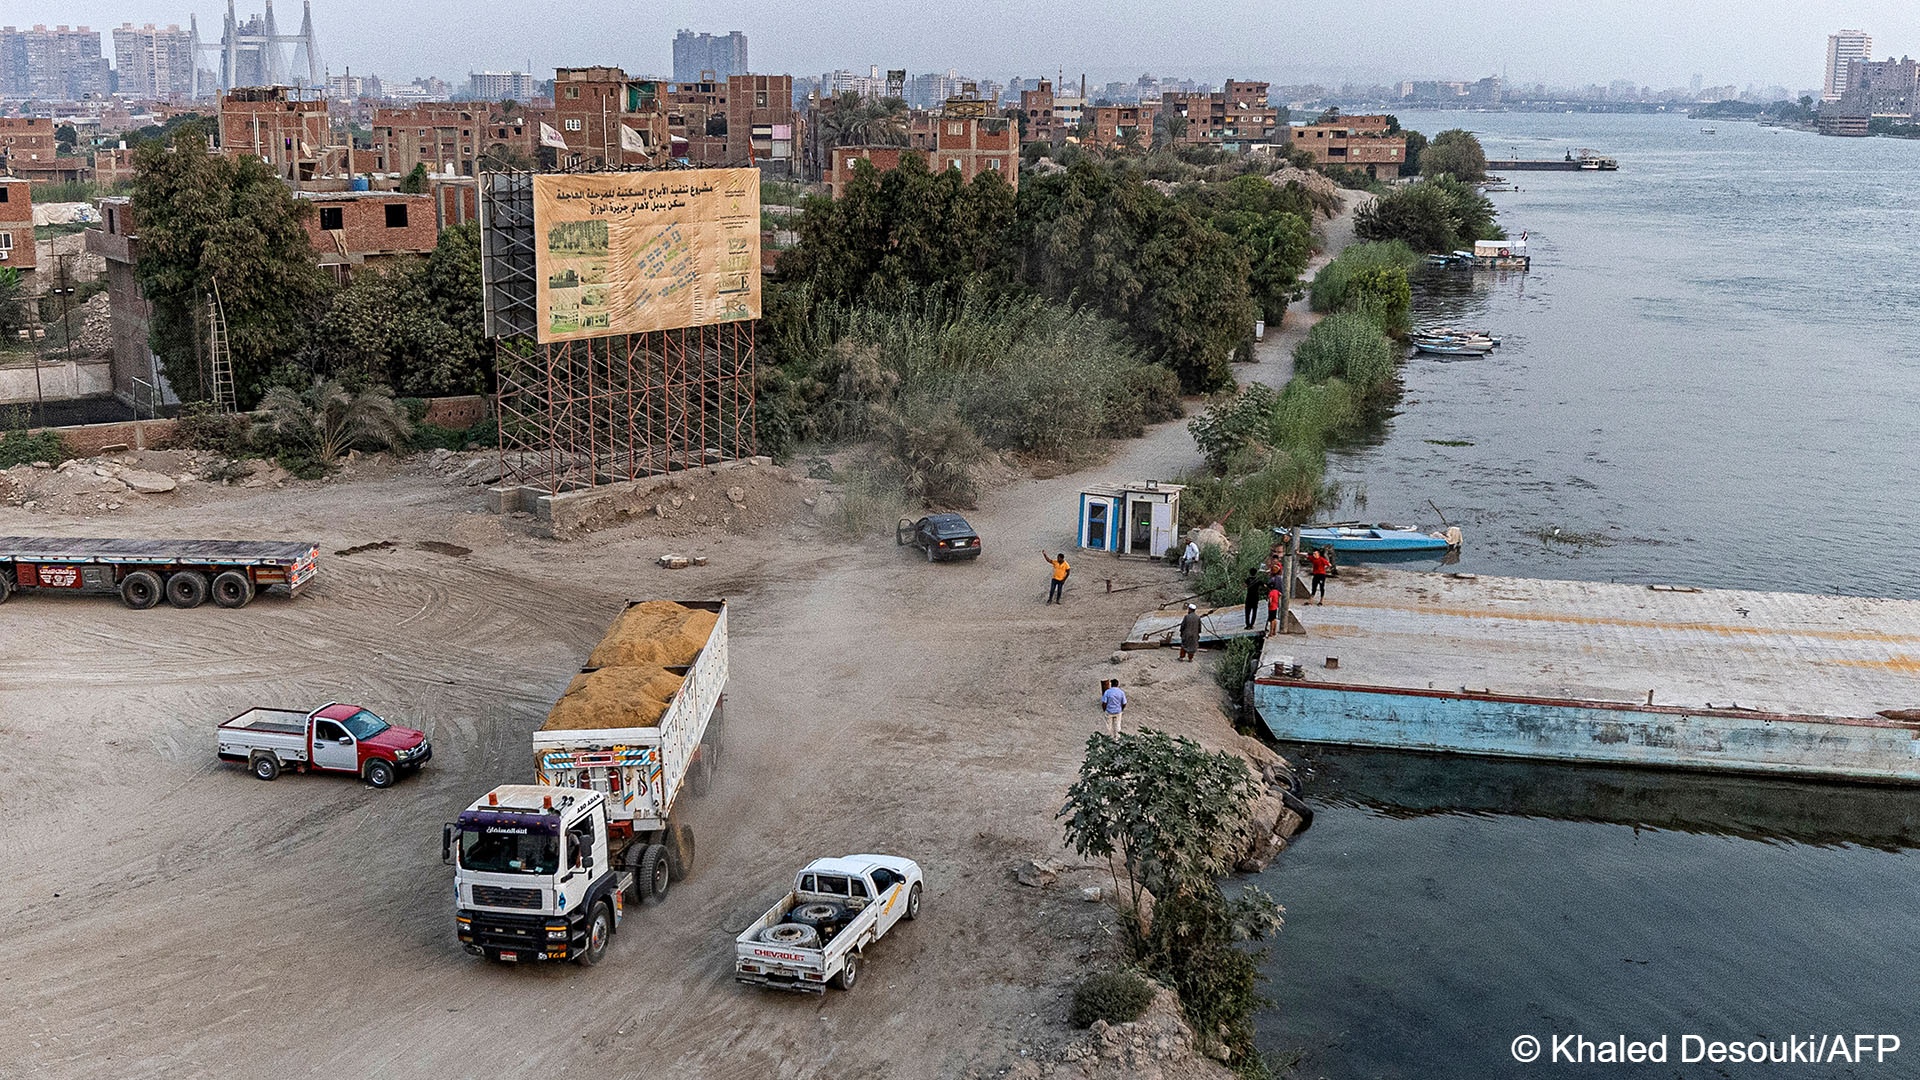 A trailer truck filled with sand waits near a dock at the construction site of new residential towers in the Nile island of Warraq in Giza province opposite the northern shore of Egypt‘s capital on August 31, 2022, the slums of which are planned for development by the Egyptian government (photo: AFP)